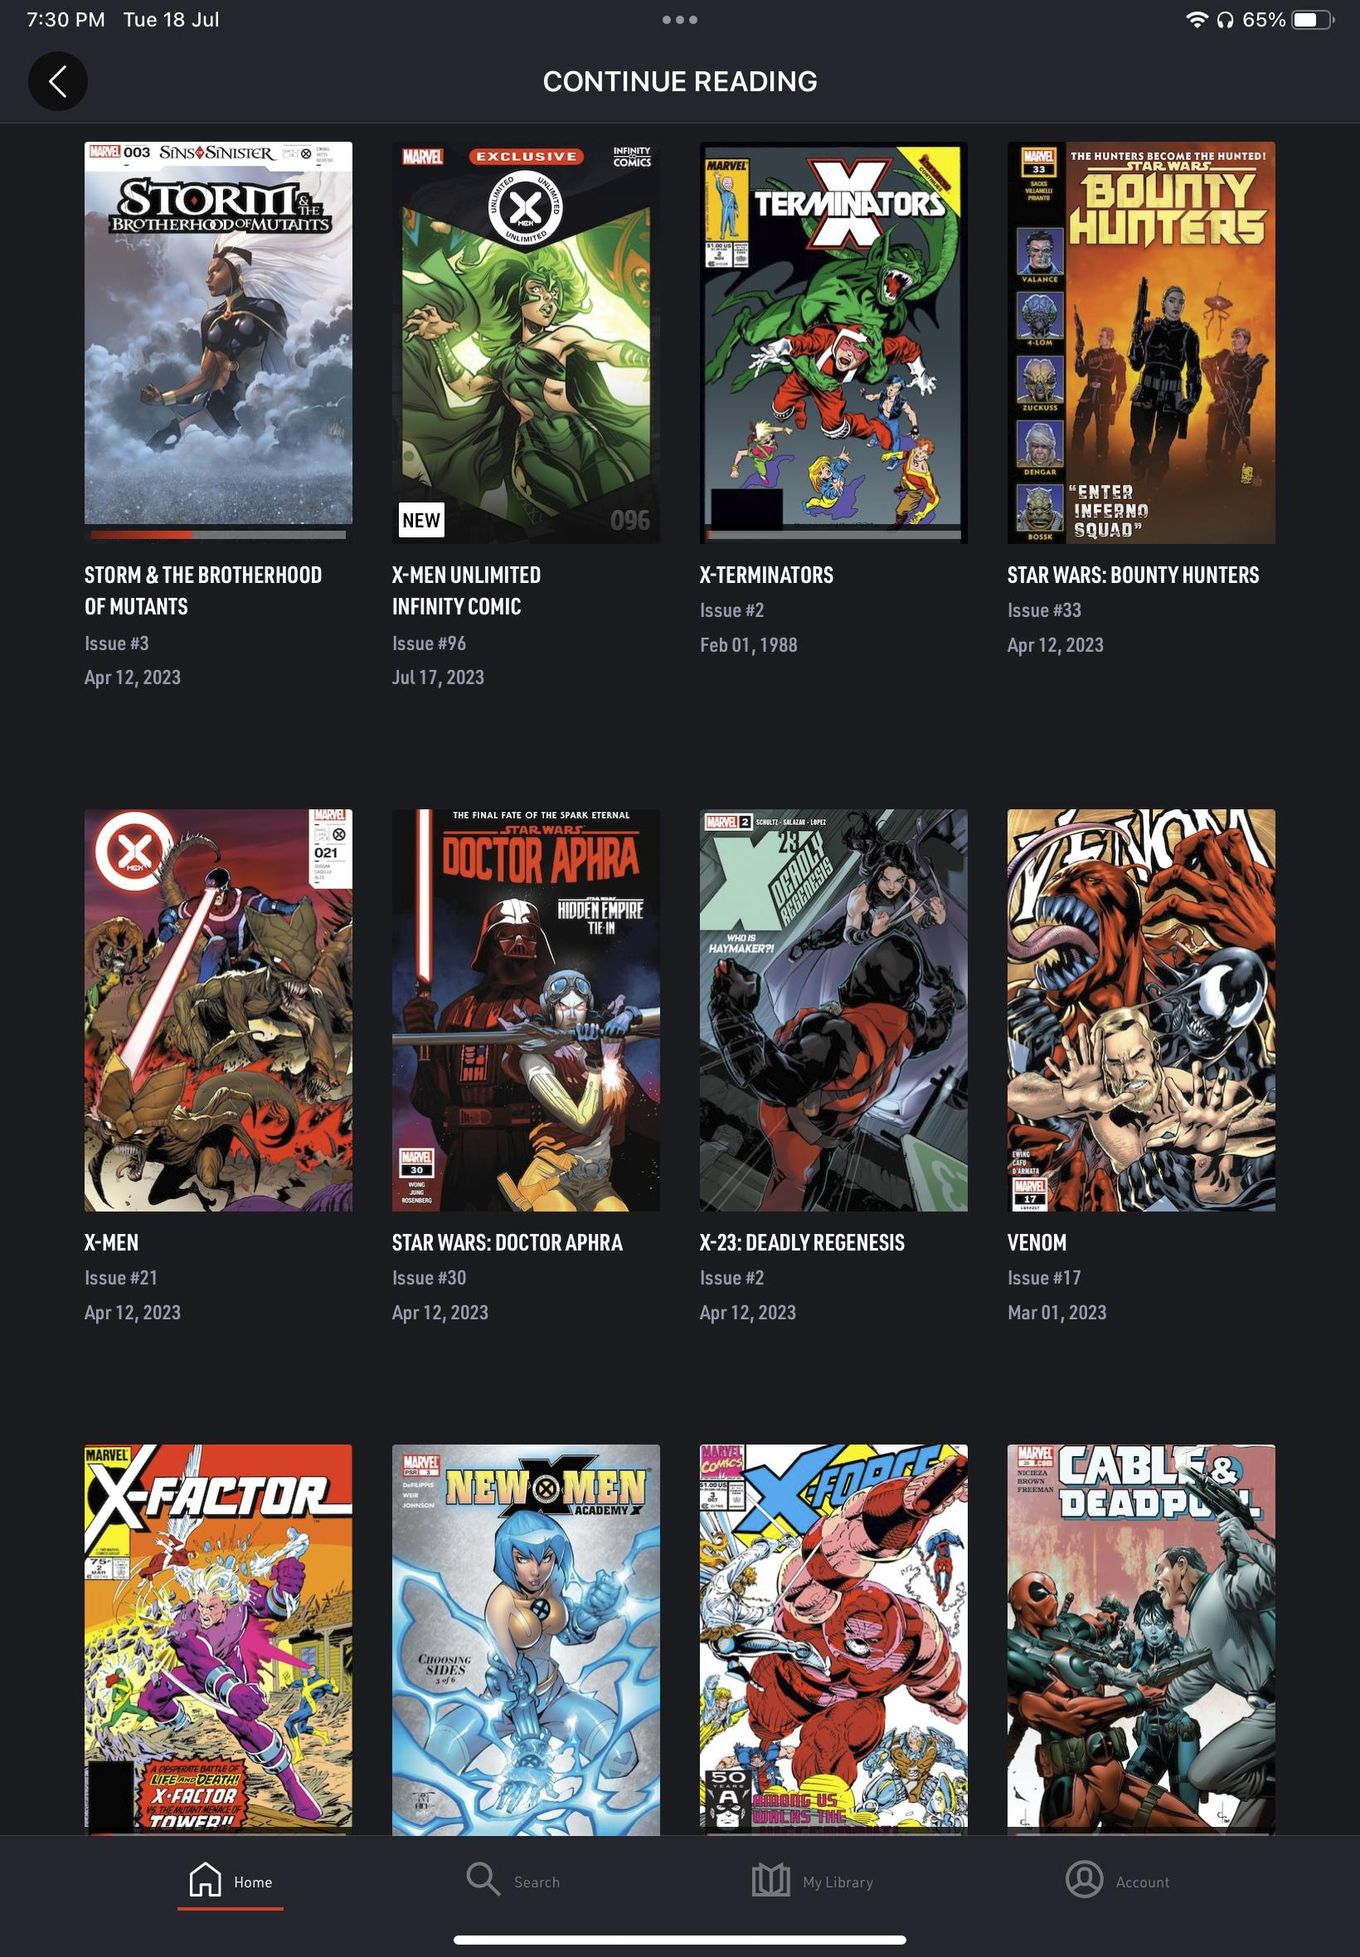 A screenshot of the the application, Marvel Unlimited showing the continue reading page.